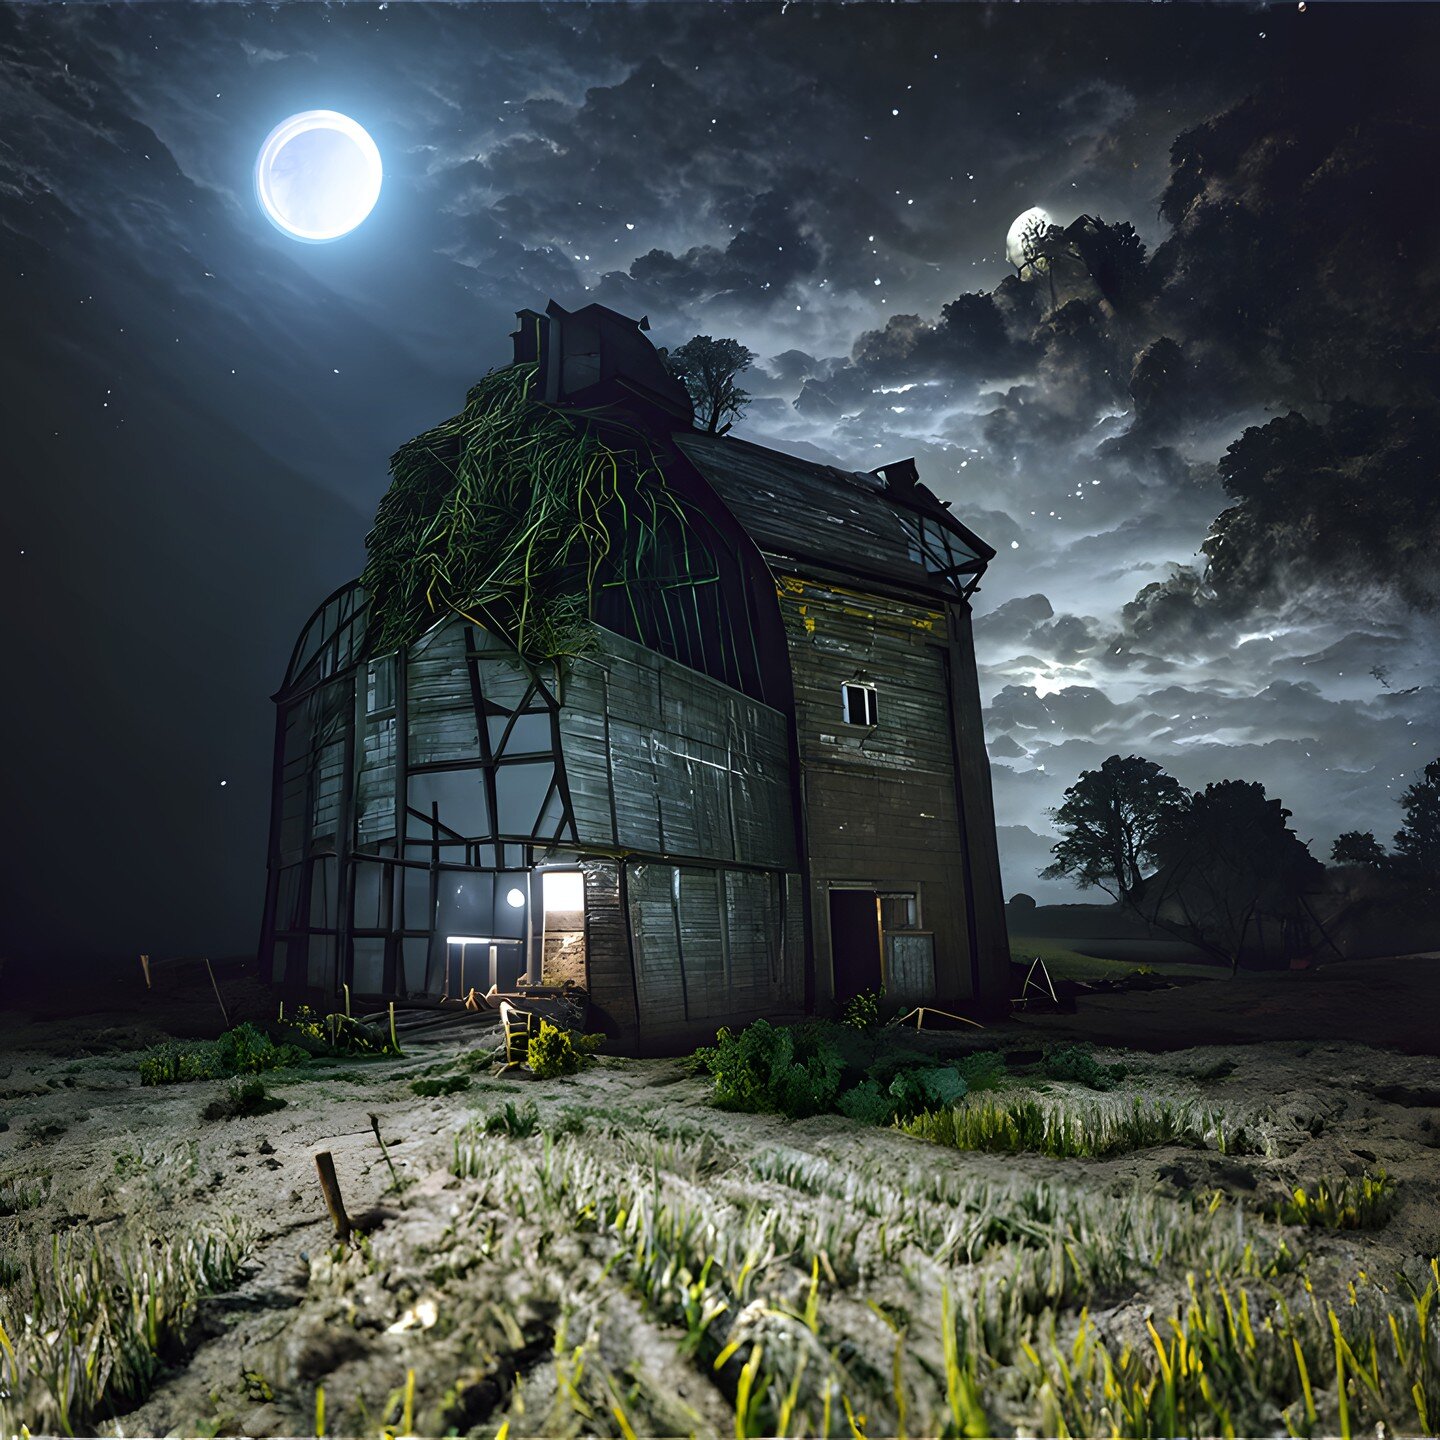 Scarecrow Moon (AI Art 🖥️🎨)

Made with Disco Diffusion

#scarecrow #barn #farm #fields #farmlife #moon #architecture #archidaily #conceptart #ai #aiart #aiartwork #aiartcommunity #generativeart #discodiffusion #machinelearning #artificialintelligen